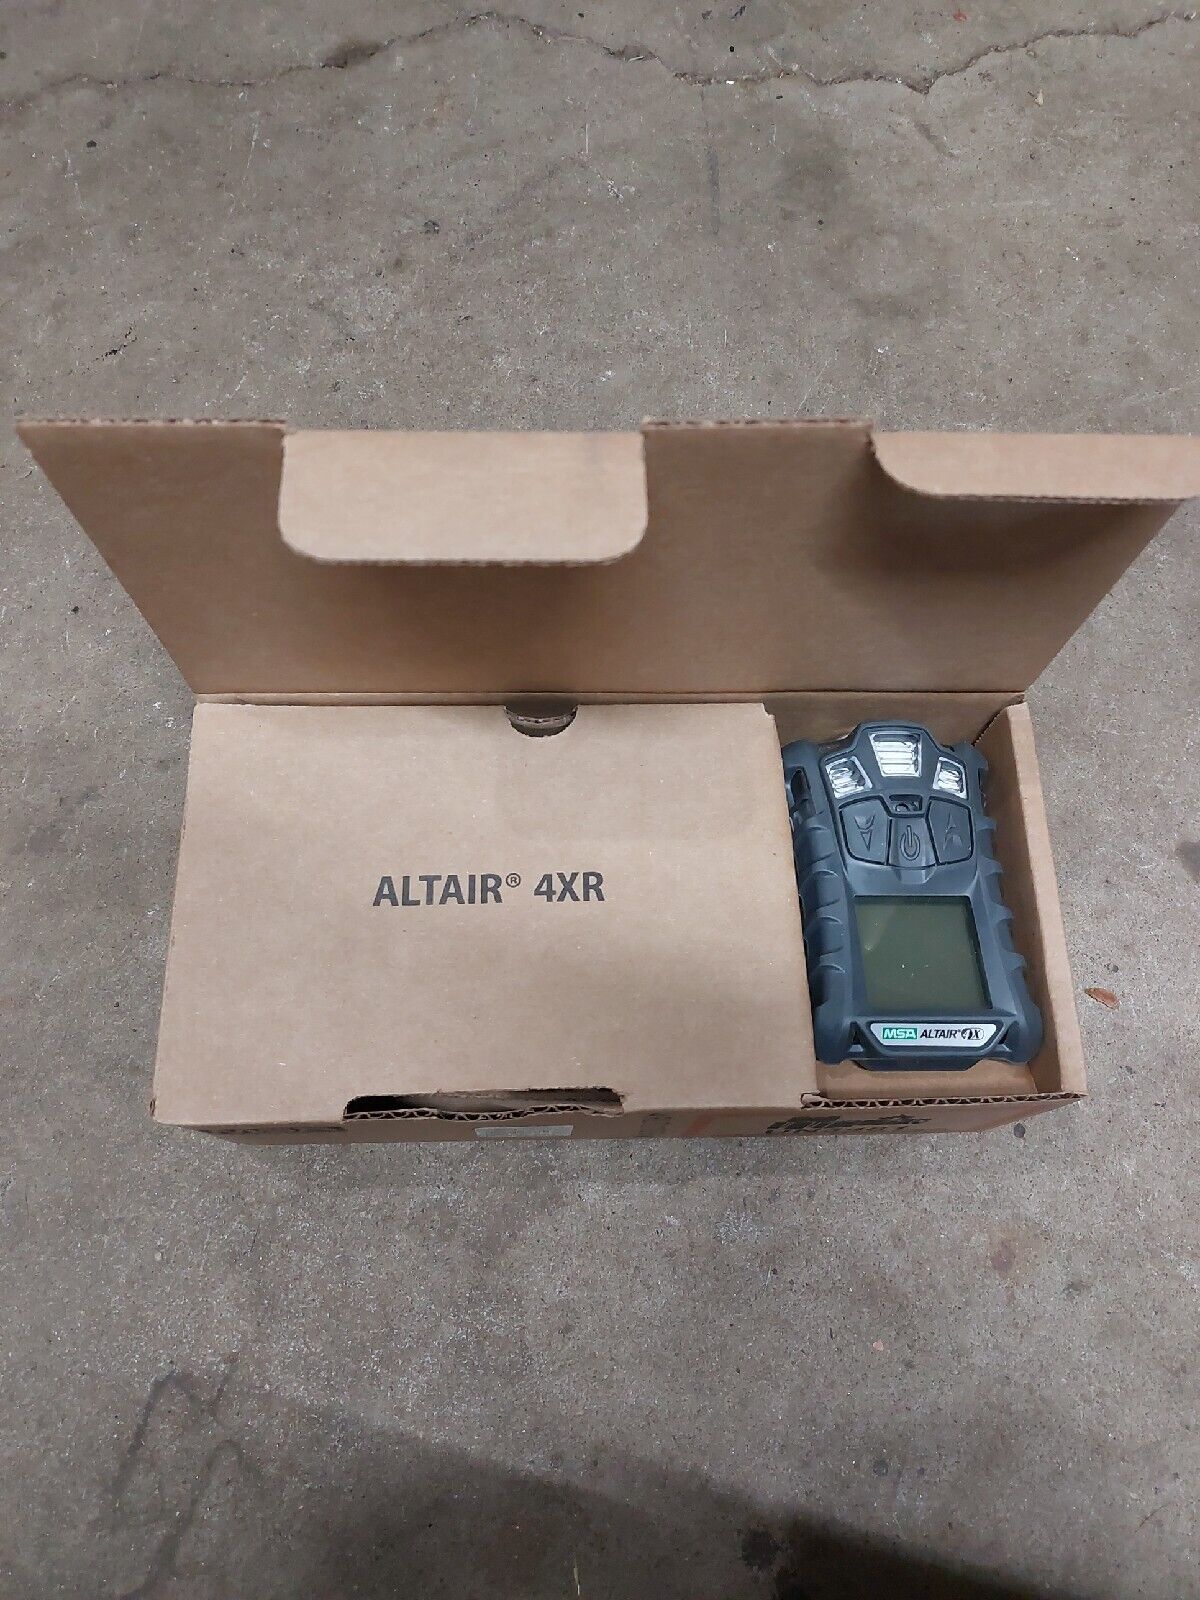 MSA ALTAIR 4X Multigas Monitor Detector W/Desk Charger O2 CH4 and CO